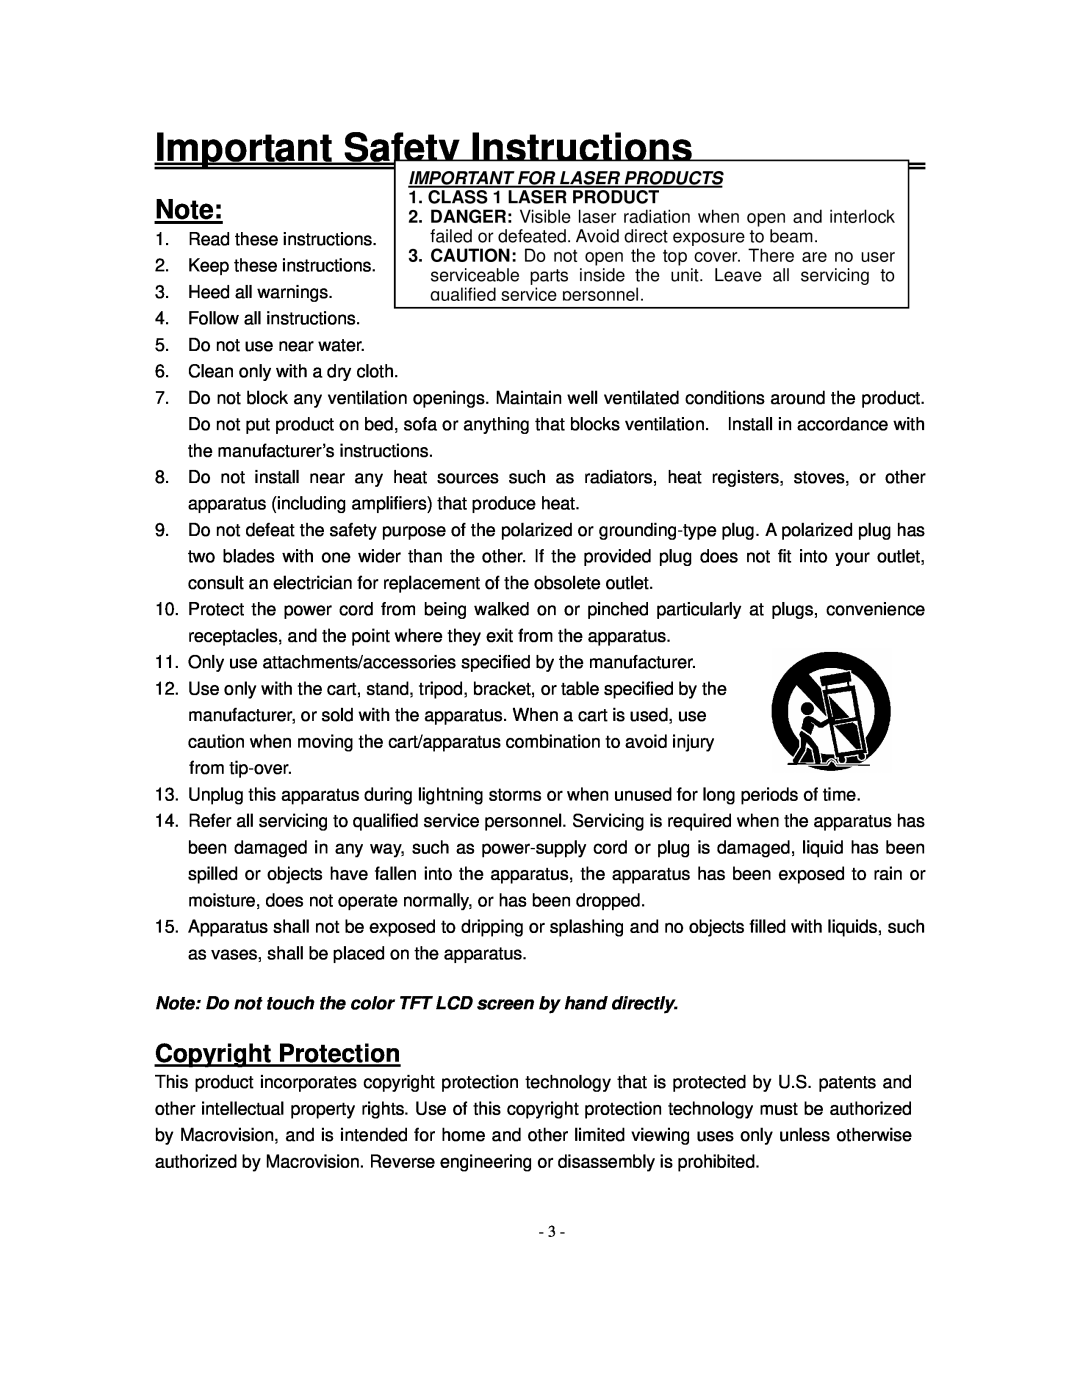 Polaroid FXM-1911C manual Copyright Protection, Important Safety Instructions, Important For Laser Products 